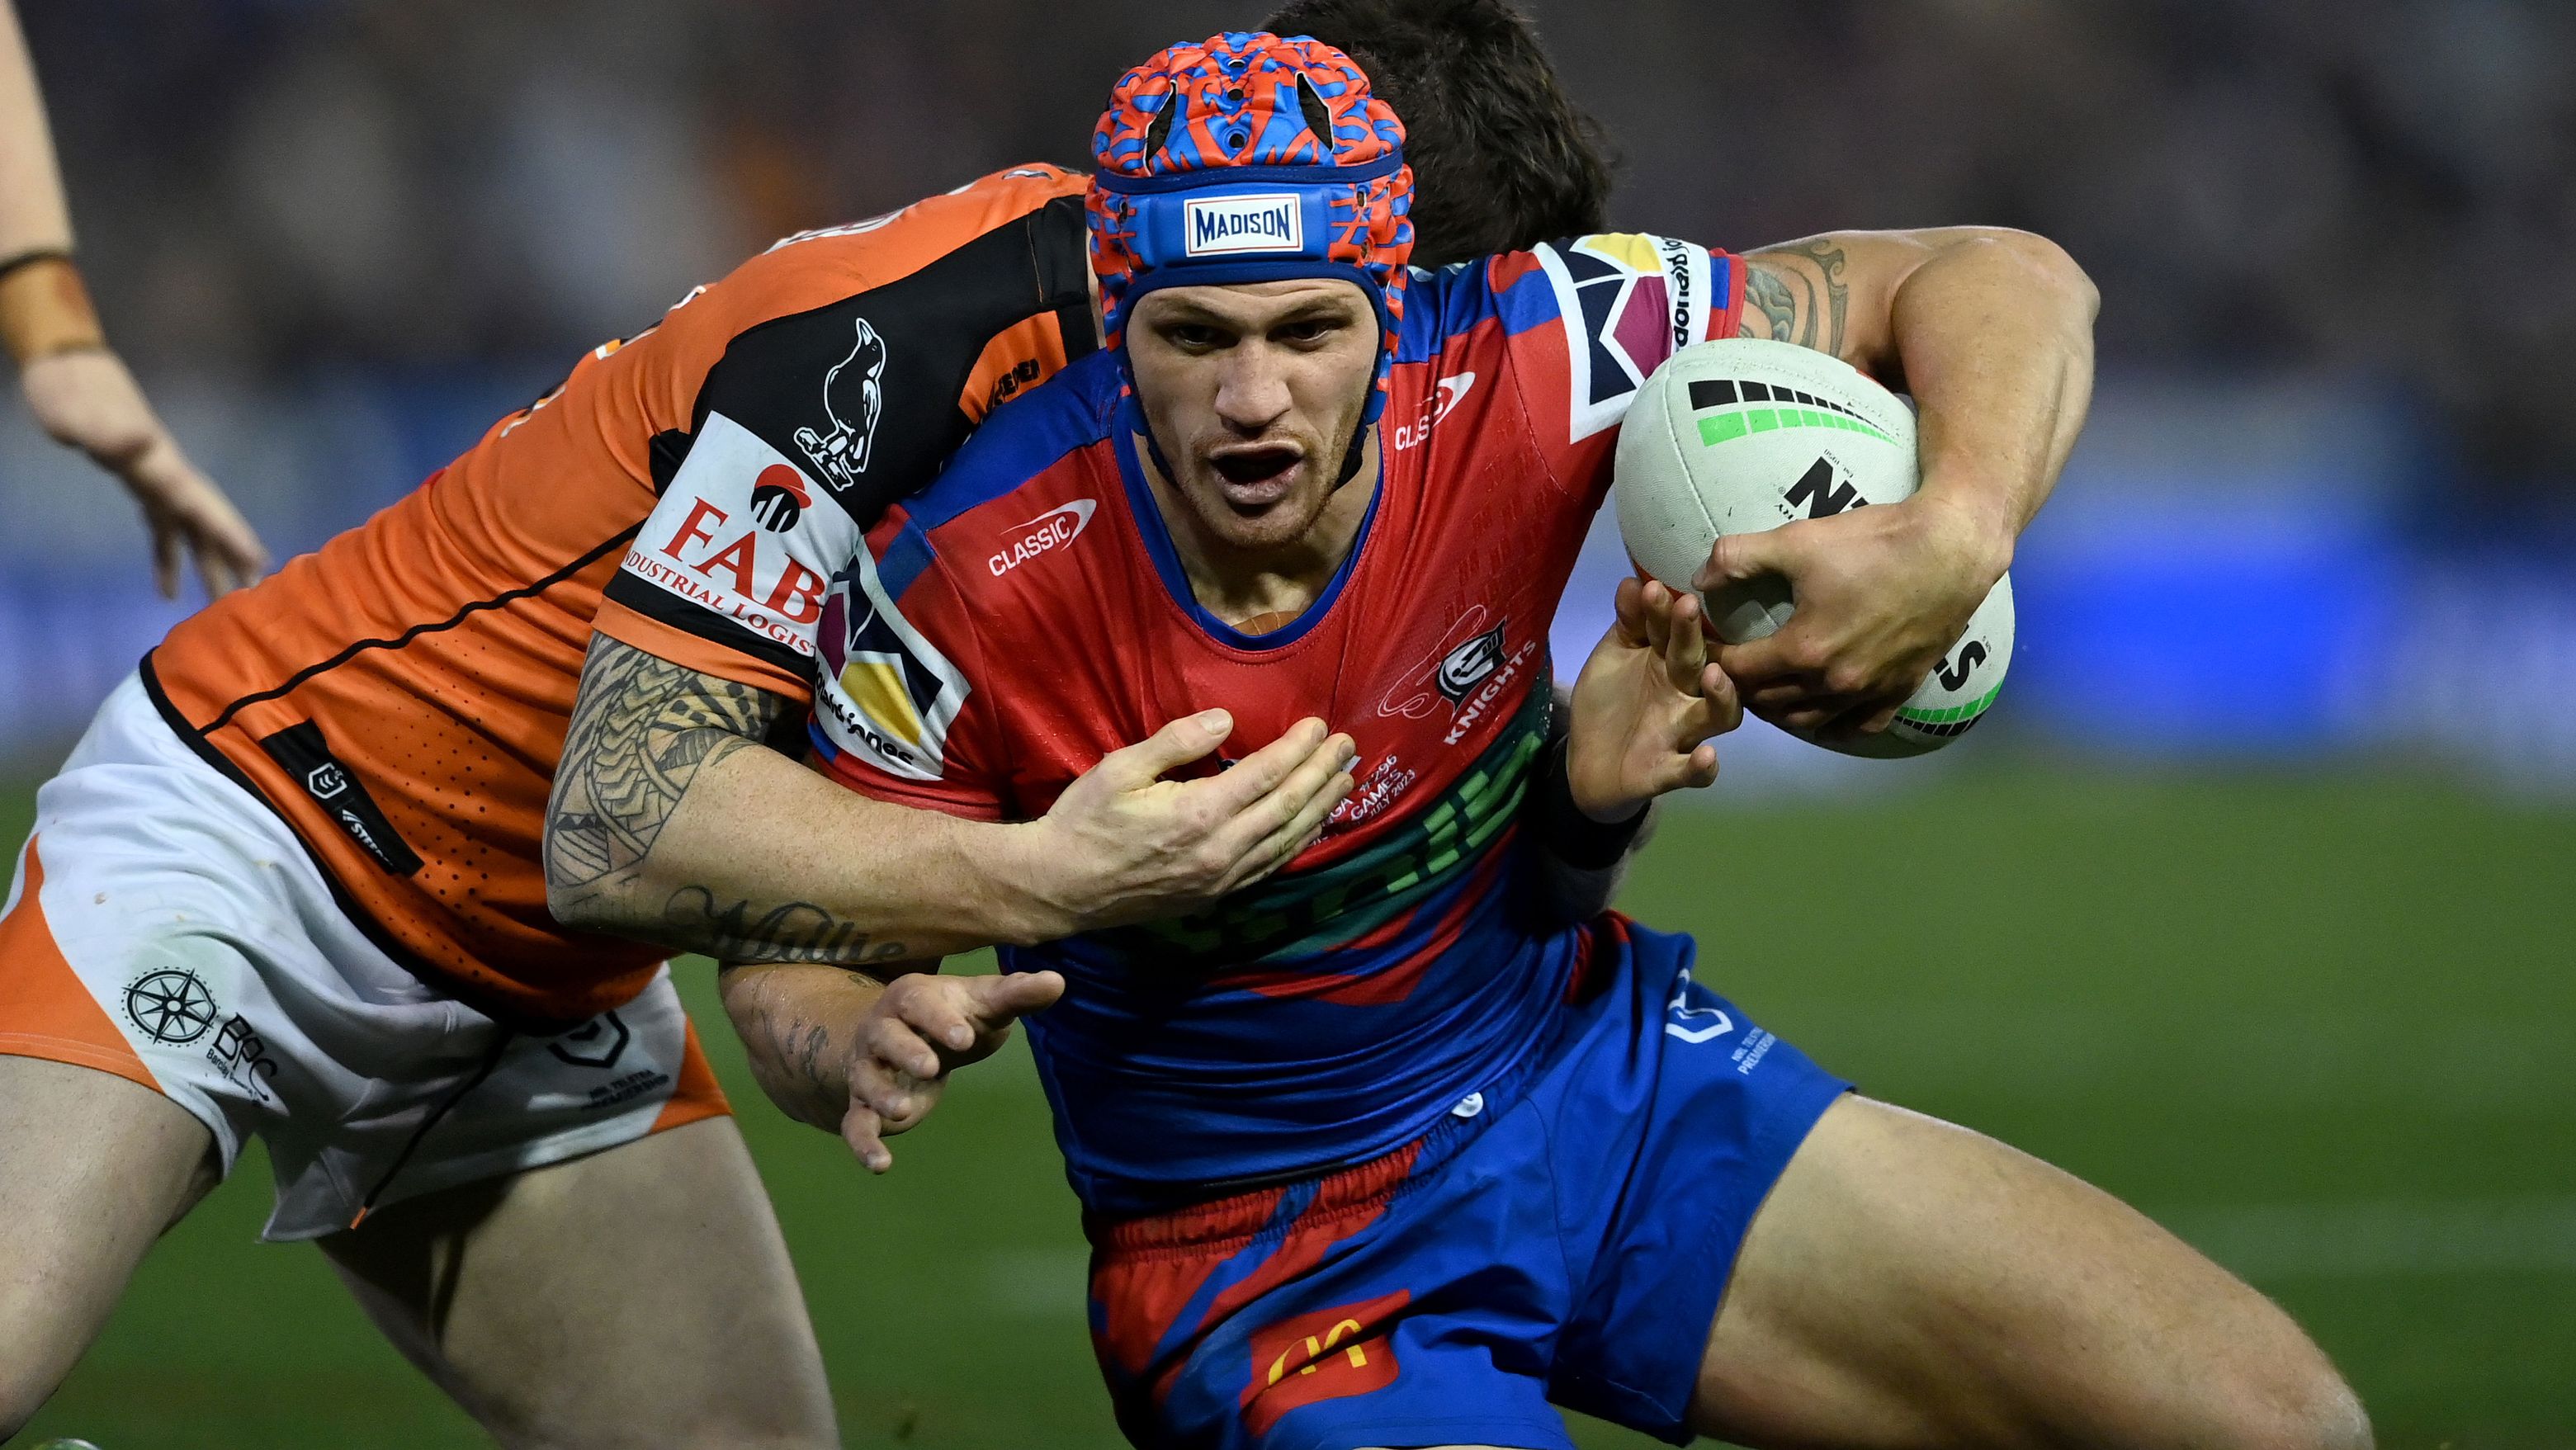 Kalyn Ponga in action for the Knights against the Tigers. NRL Photos/Gregg Porteous